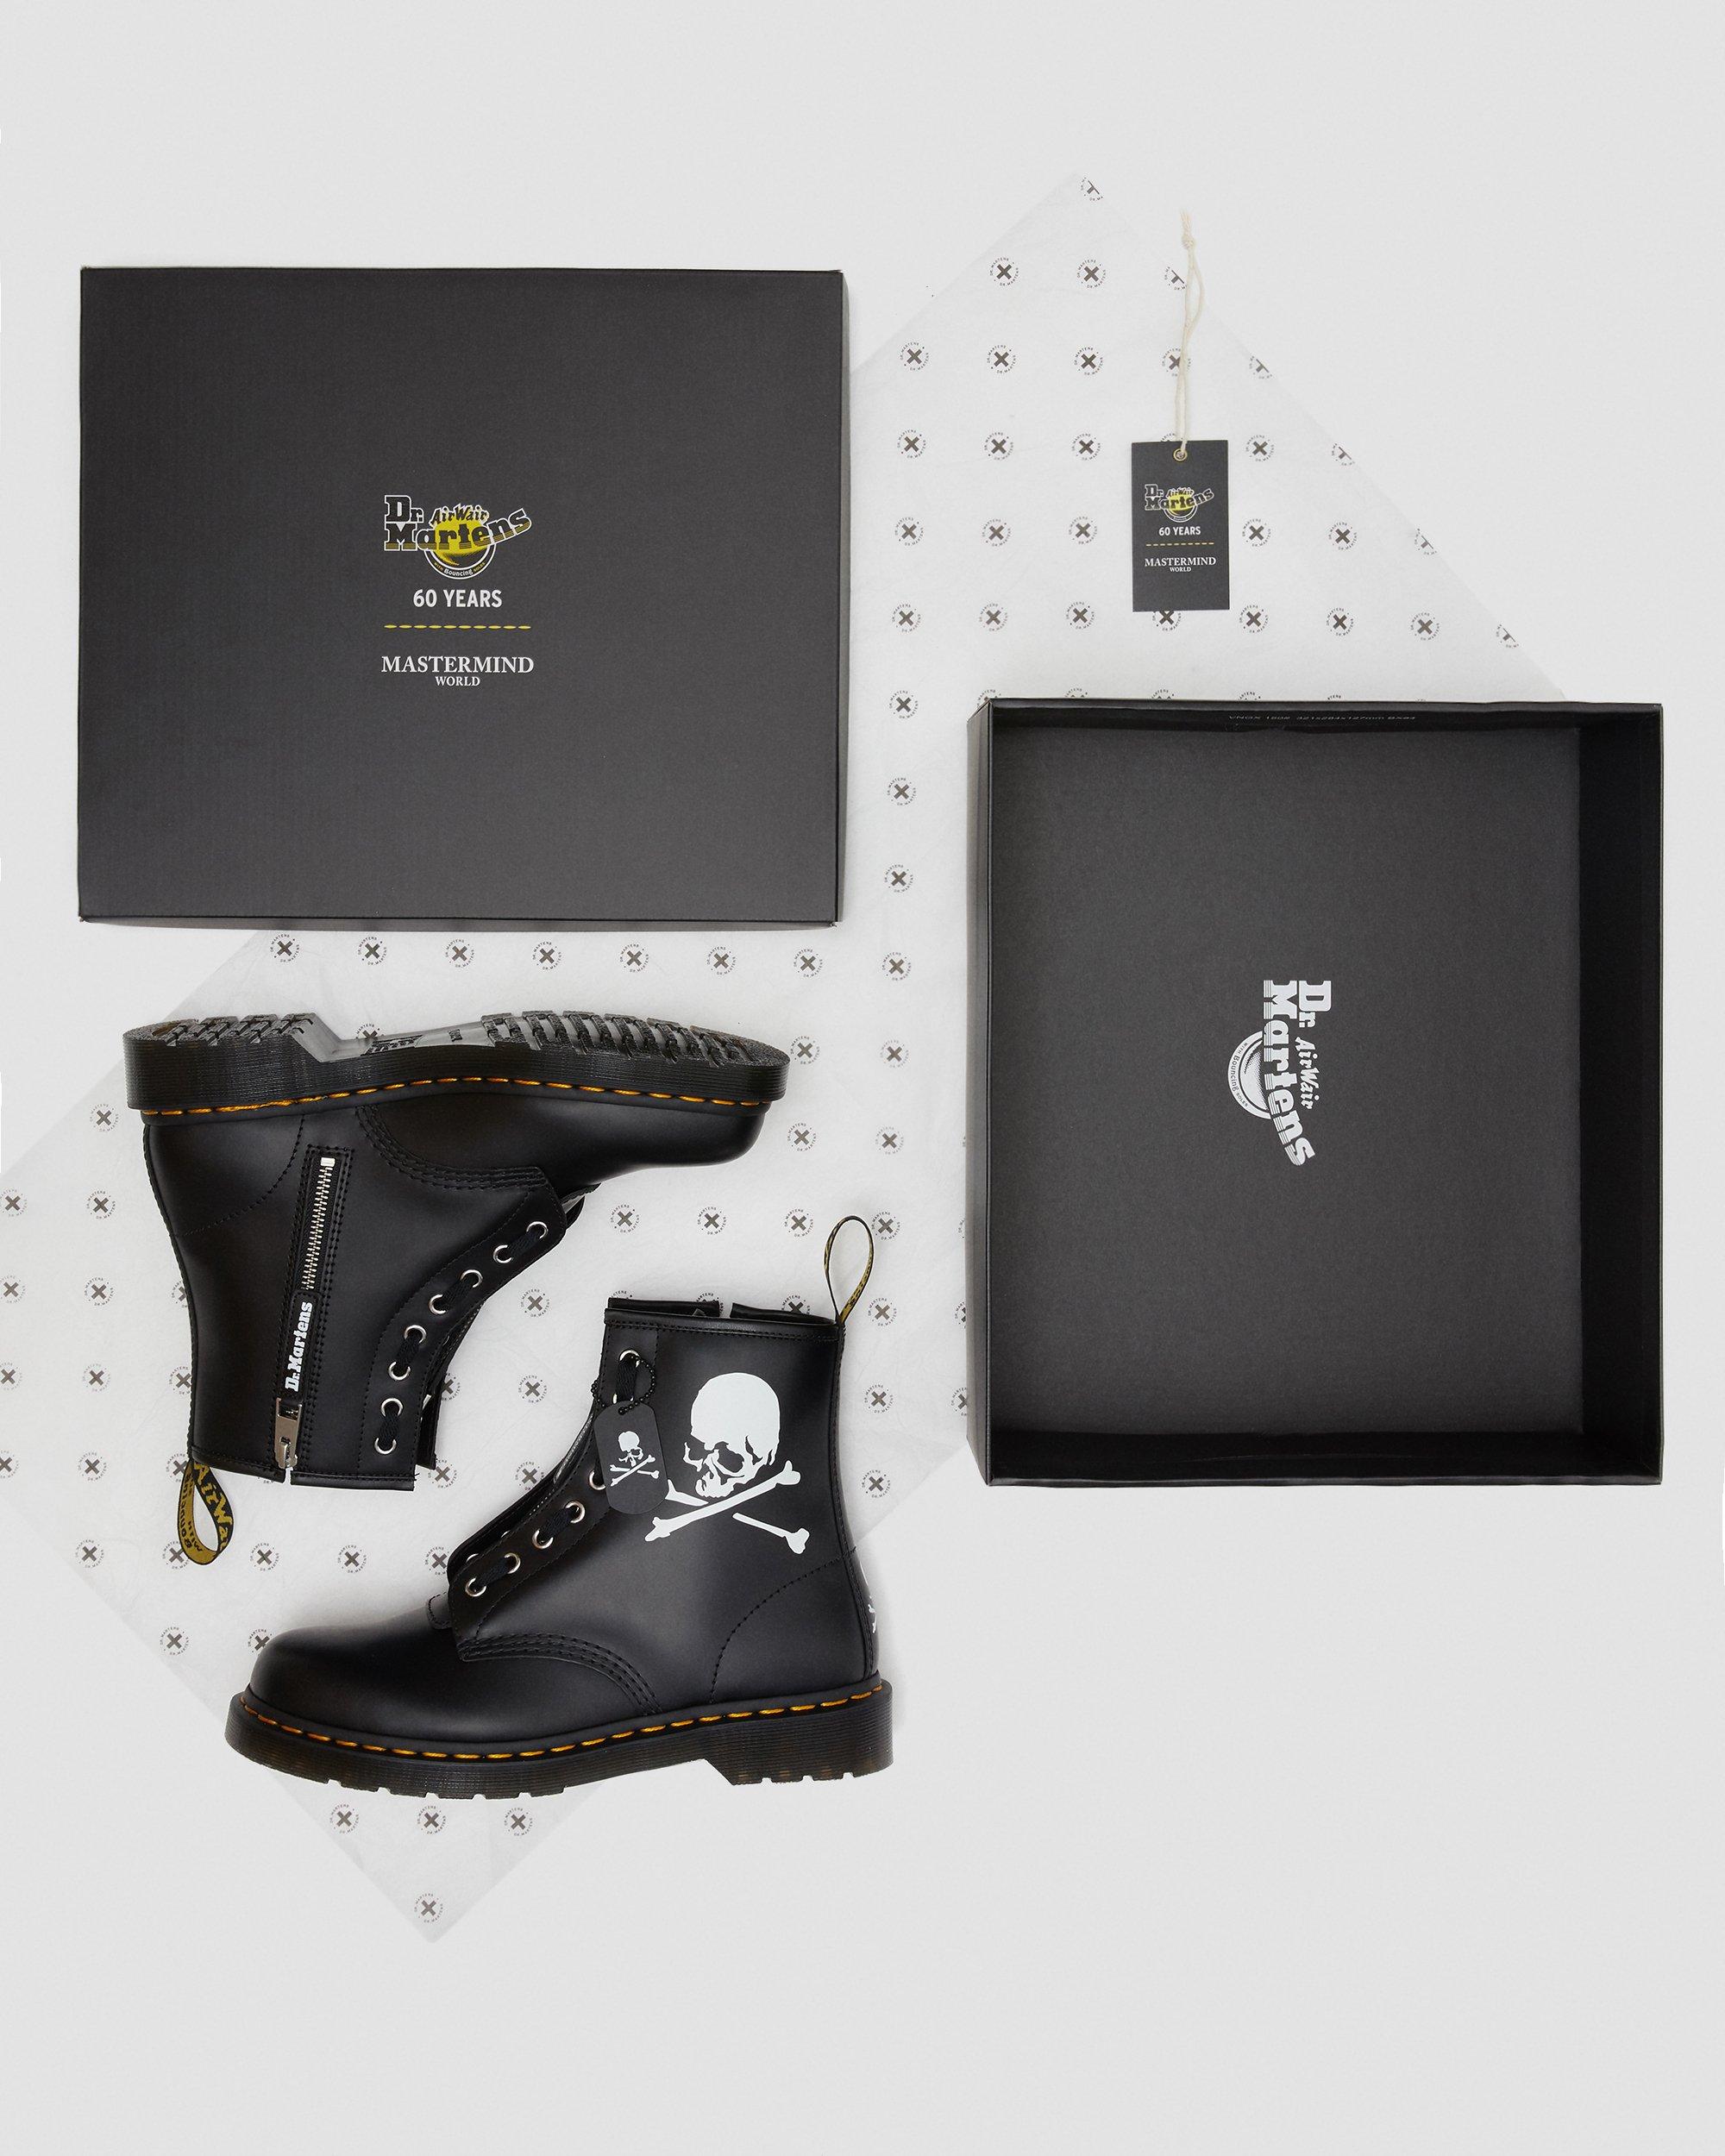 DR MARTENS 1460 Mastermind Leather Lace Up Boots